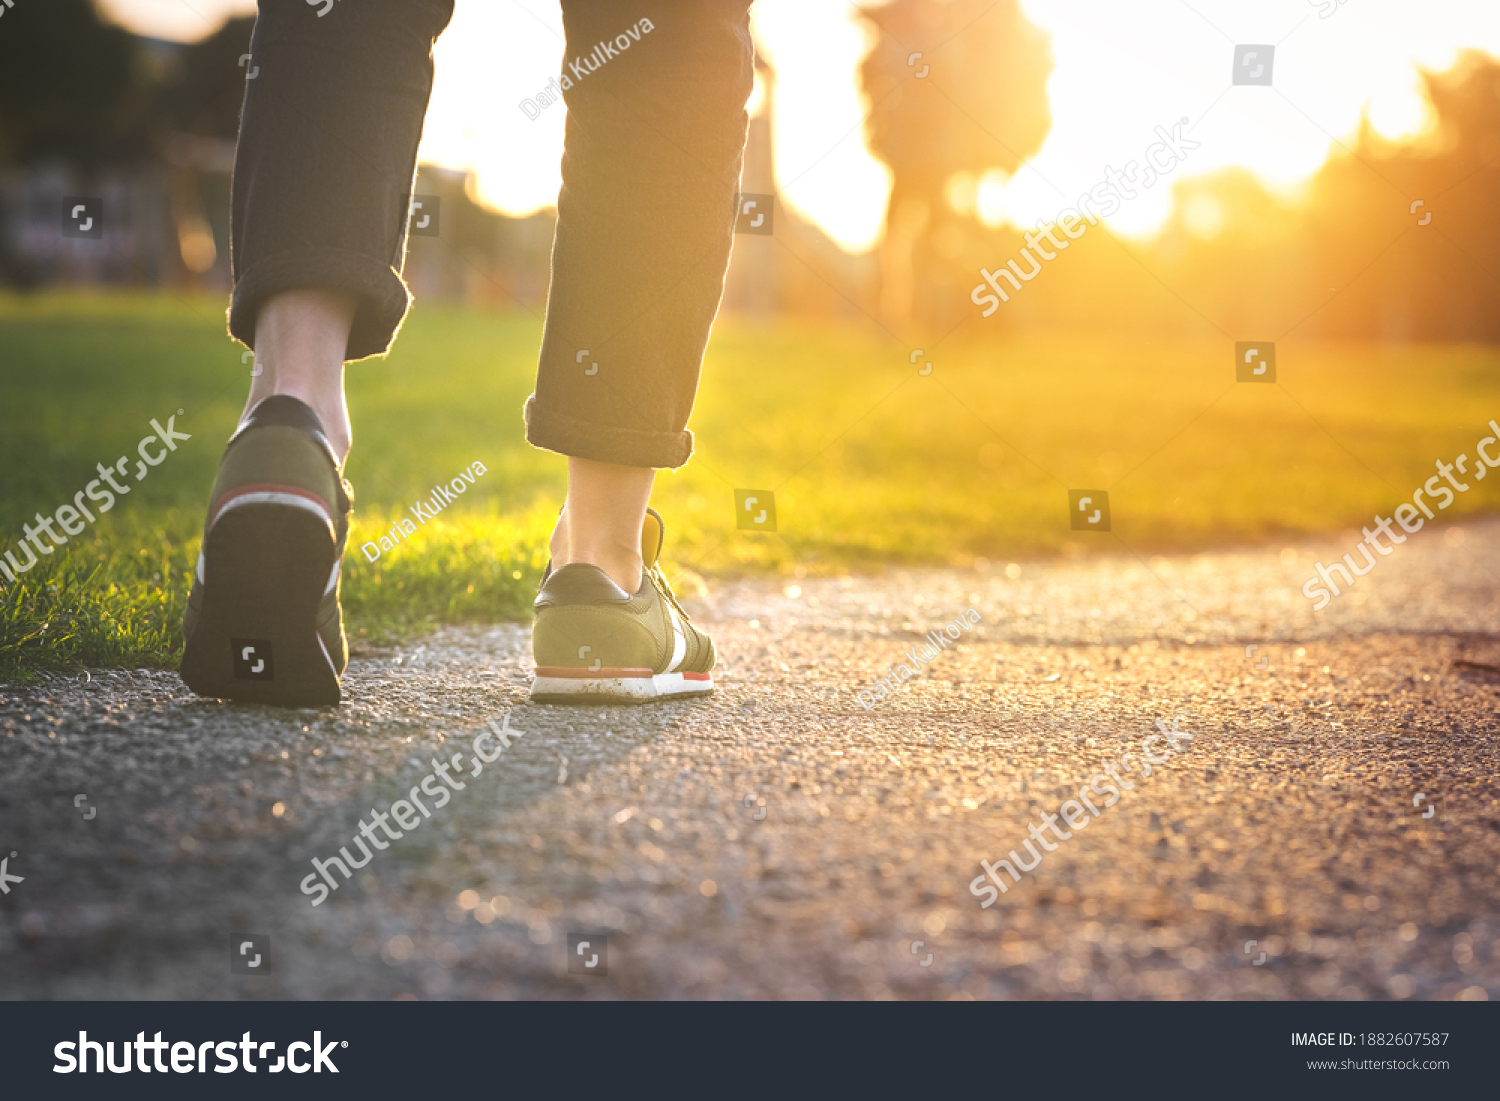 Woman walking in the park, outdoors. Closeup on shoe with rolled up jeans. Taking a step. New life concept #1882607587